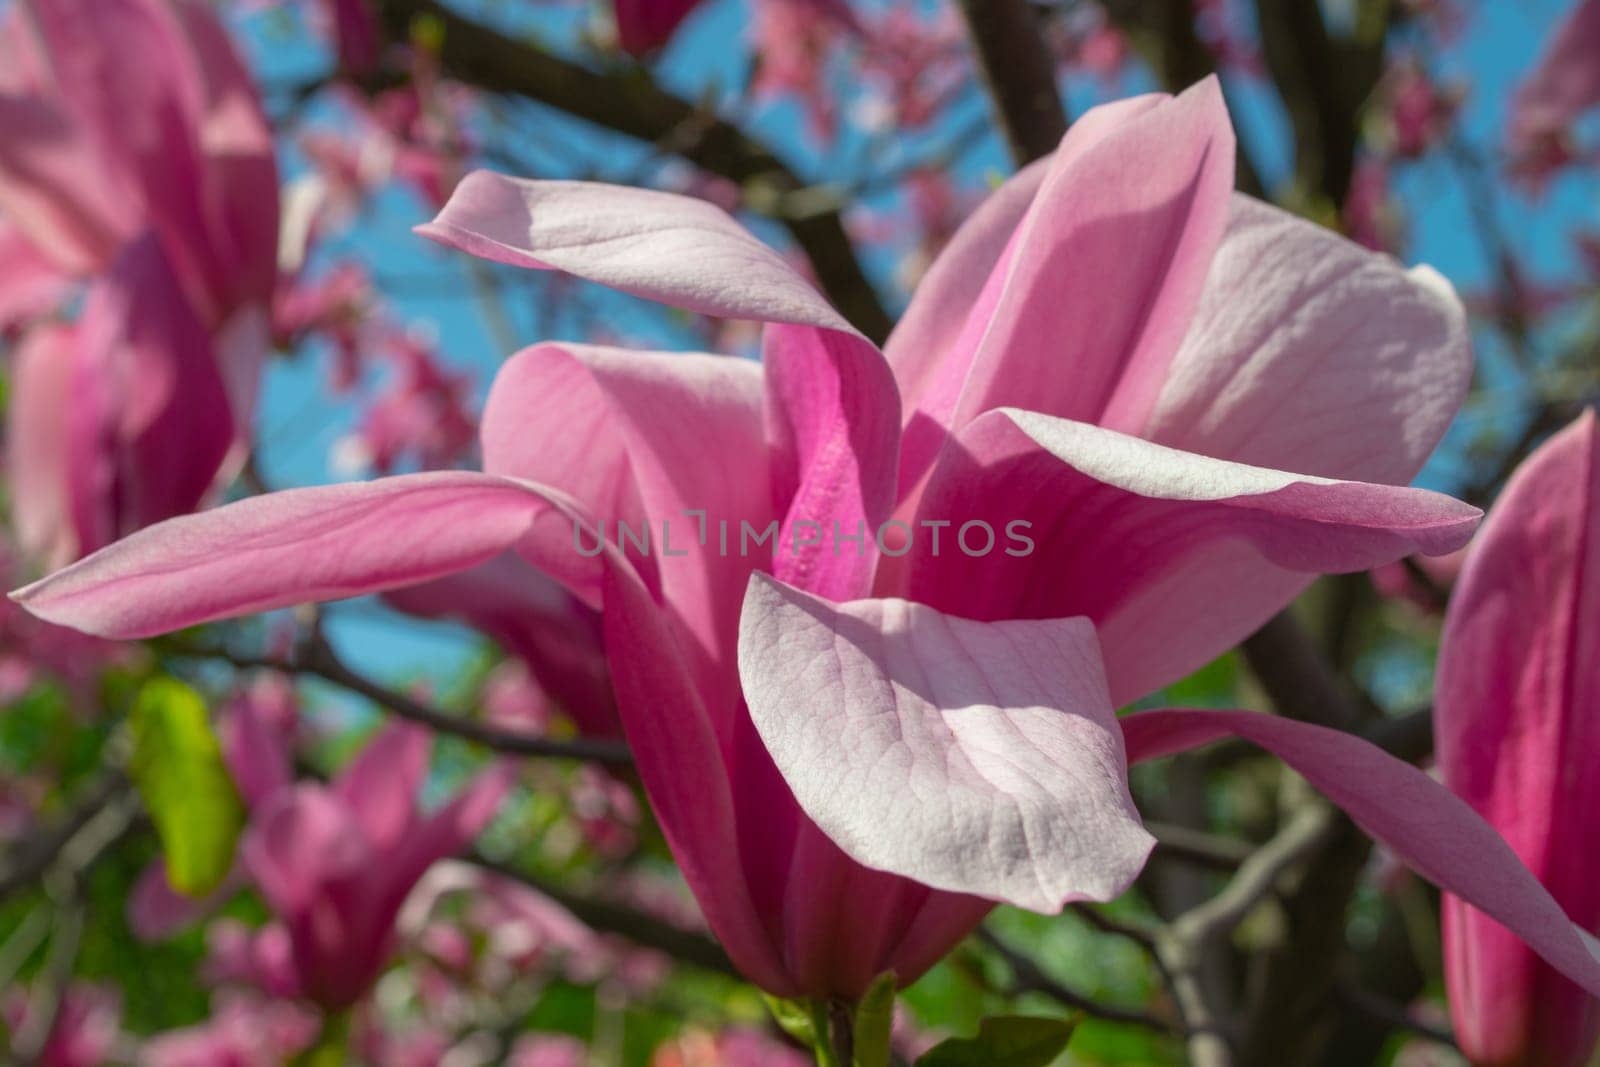 Gentle pink Magnolia soulangeana Flower on a twig blooming against clear blue sky at spring